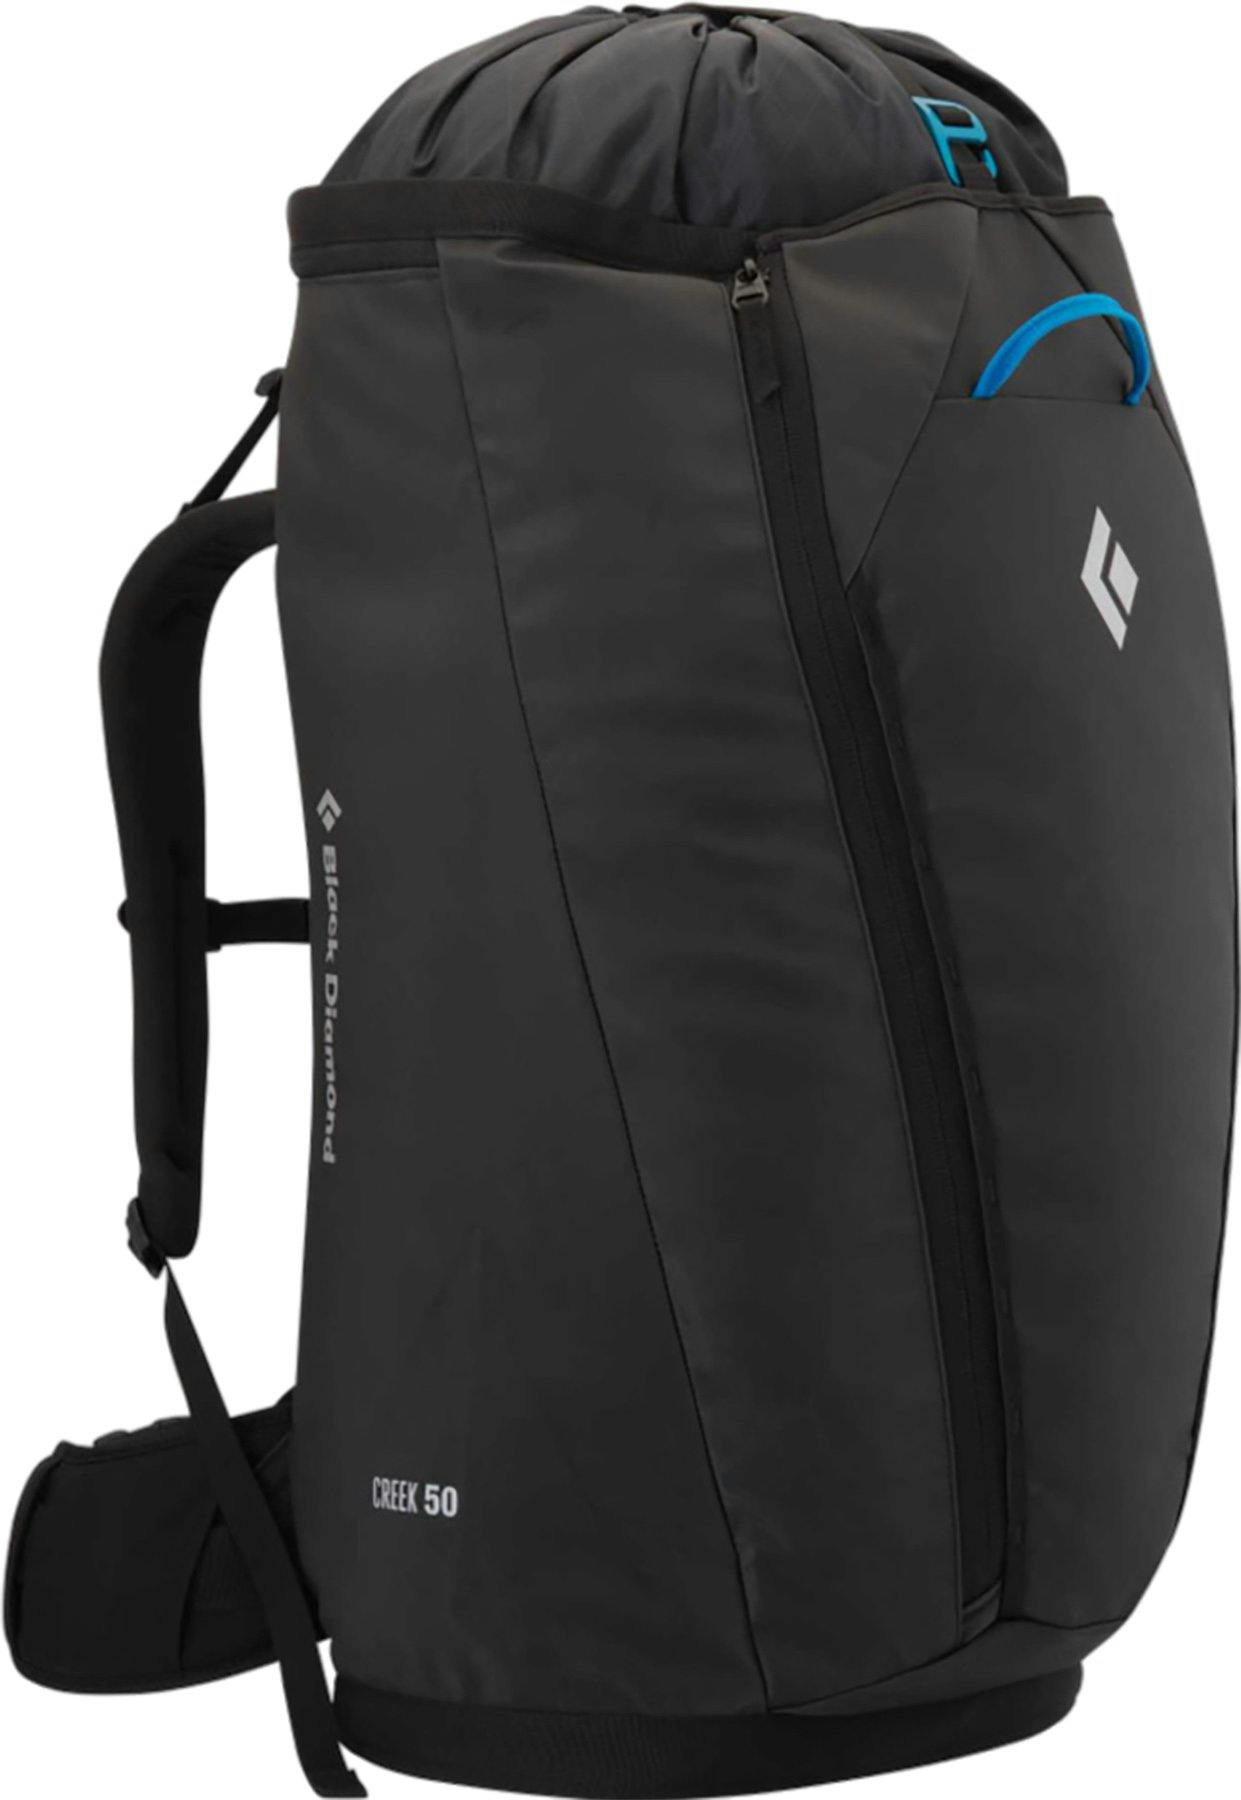 Product image for Creek 50L Backpack